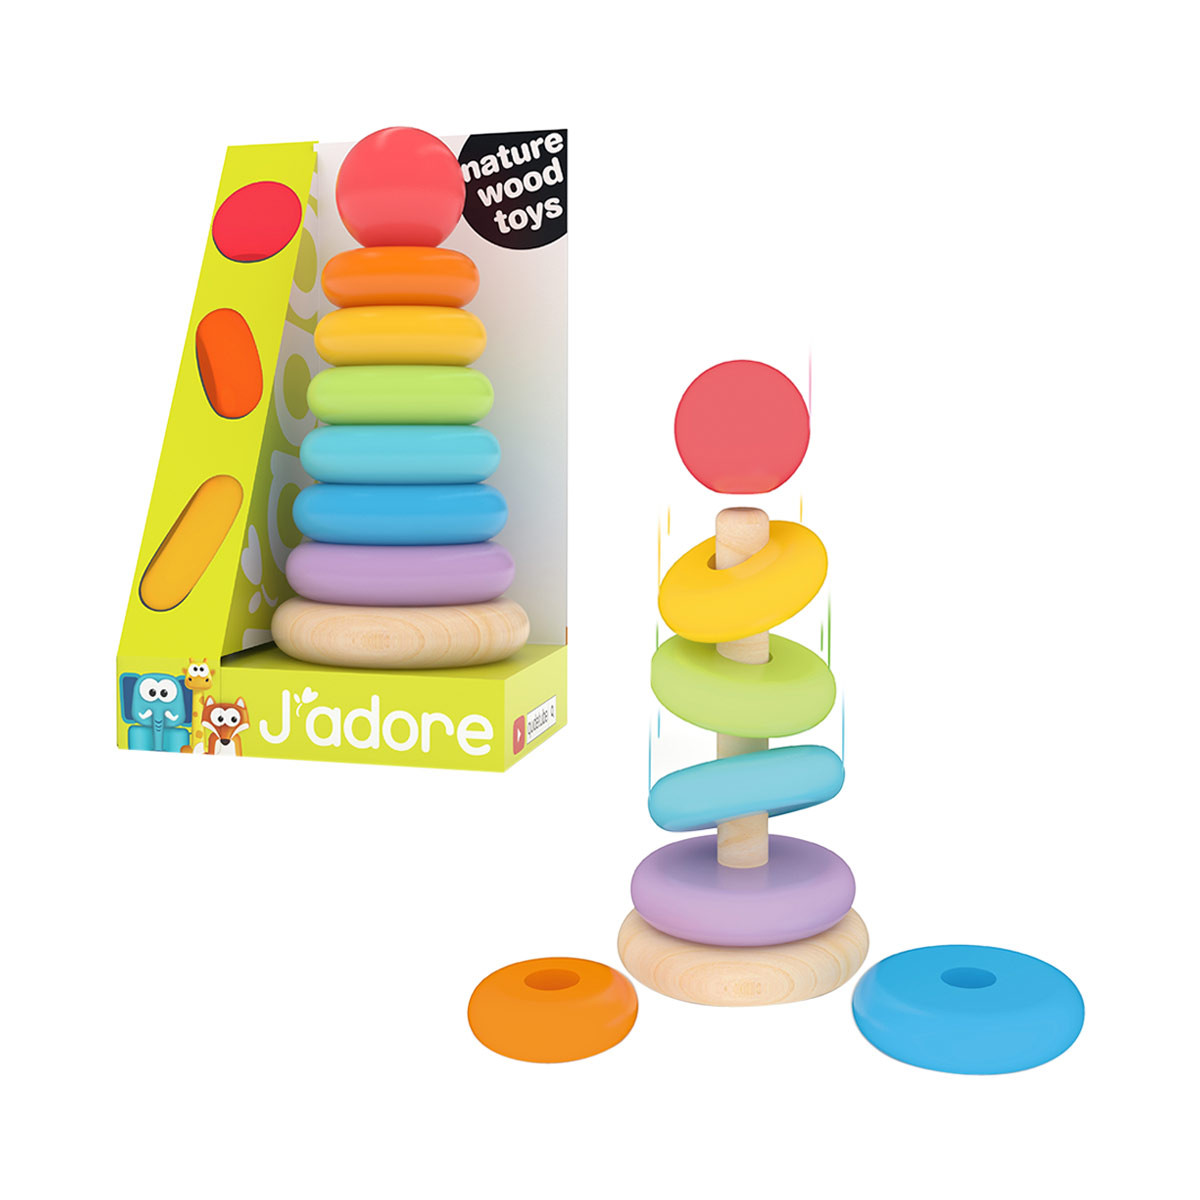 J'adore Rainbow Wooden Ring Stacker